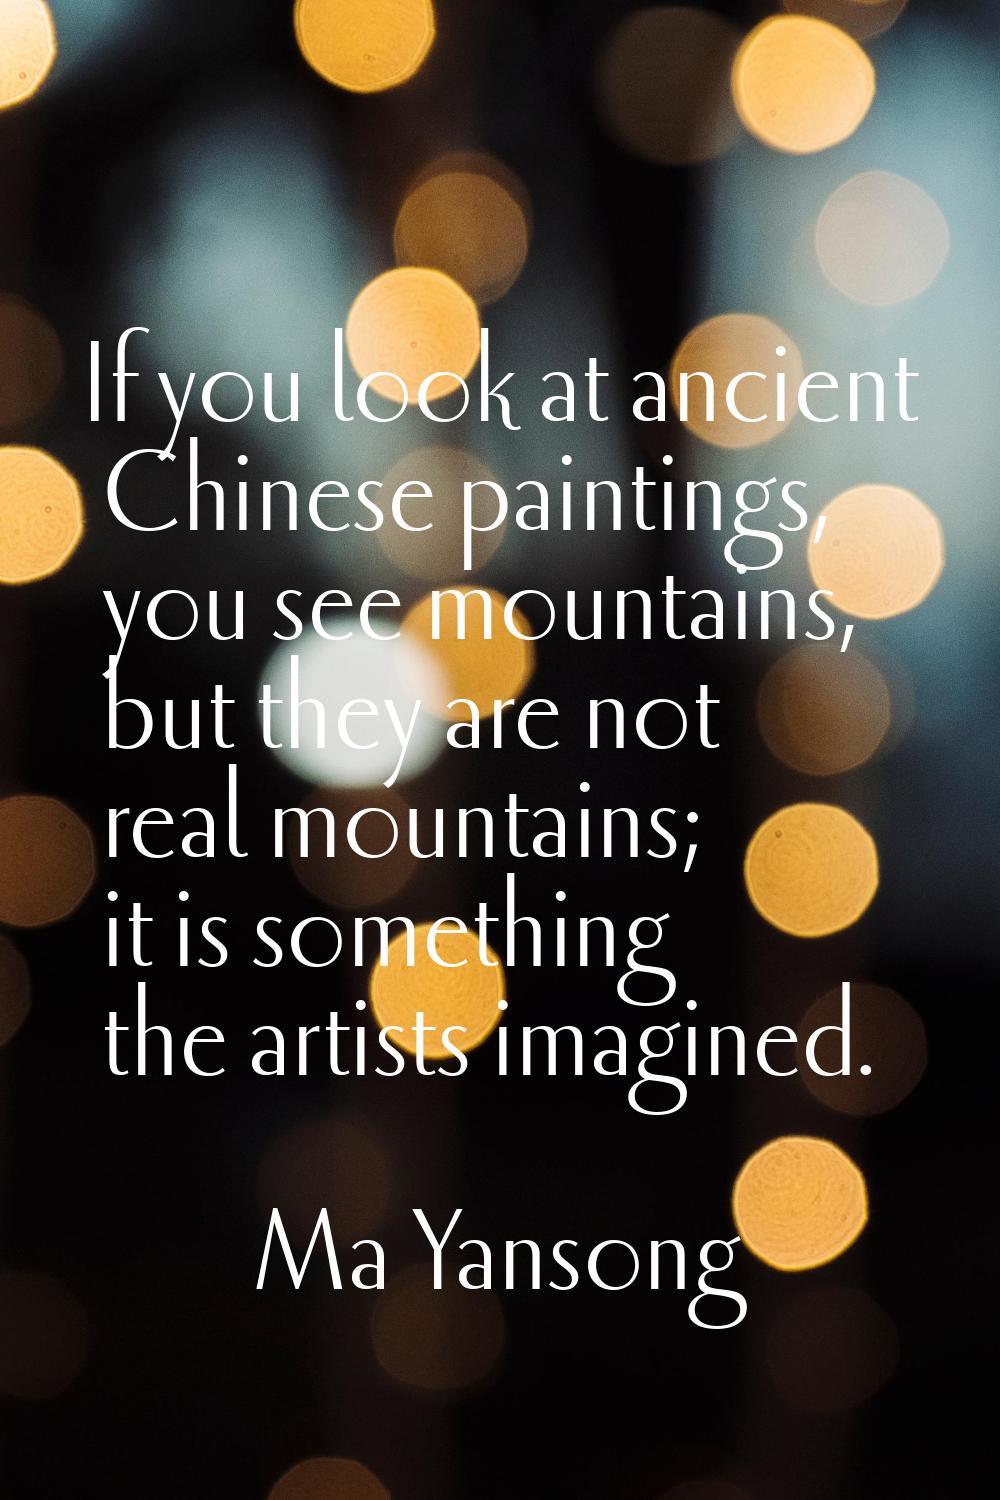 If you look at ancient Chinese paintings, you see mountains, but they are not real mountains; it is